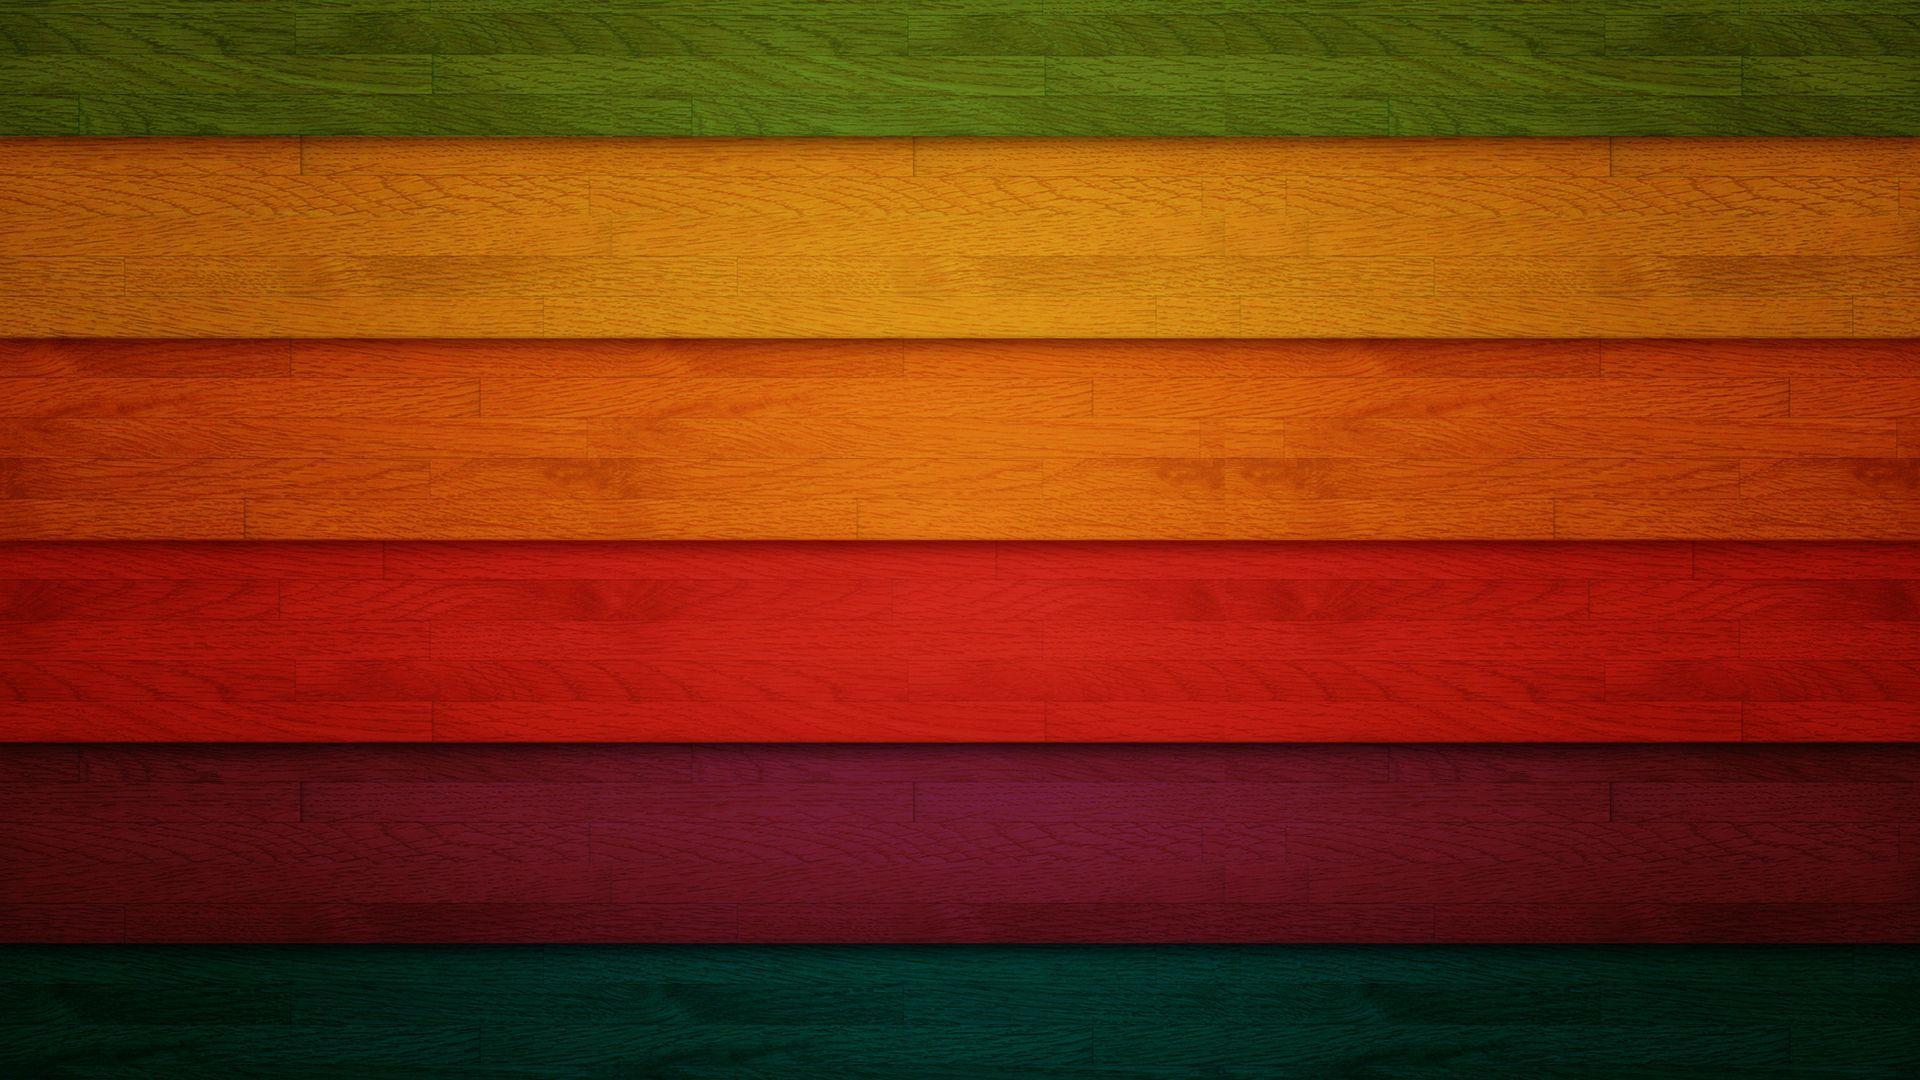 MIUI Resources Team] 10 Texture Smooth Wallpaper [1920*1080